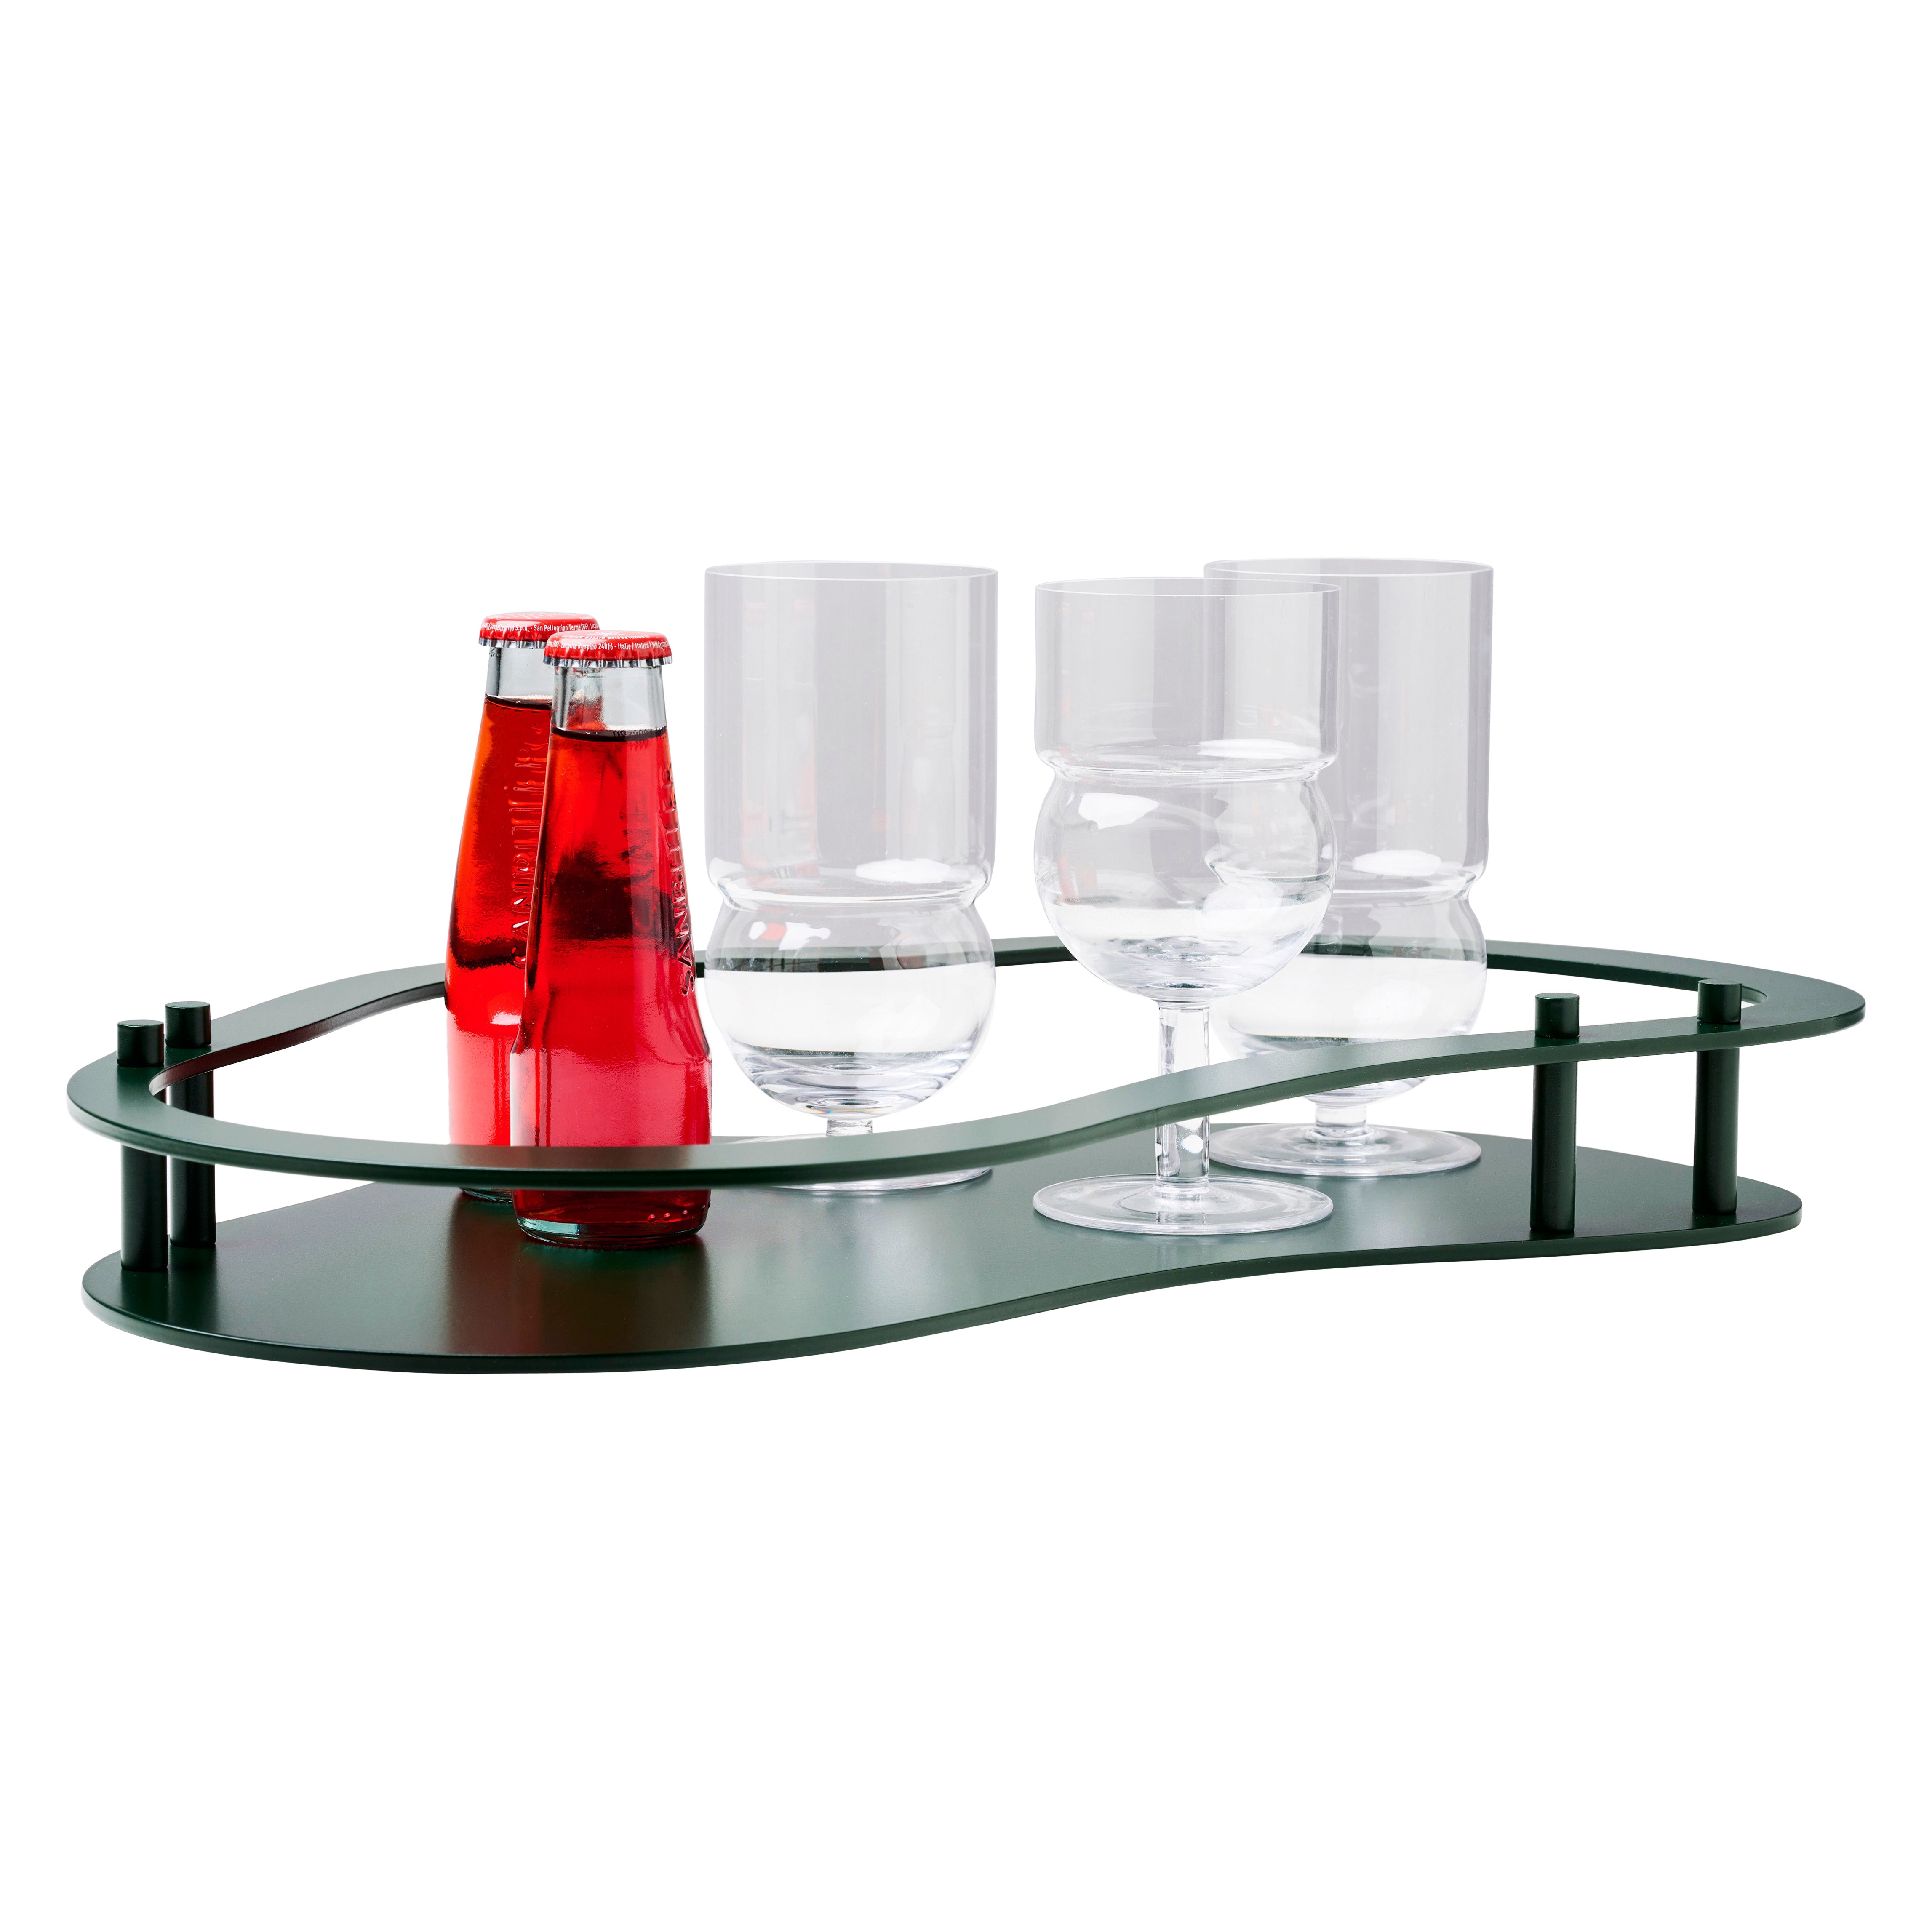 21st Century Tray Handcrafted in  Italy by Atelier Ferraro